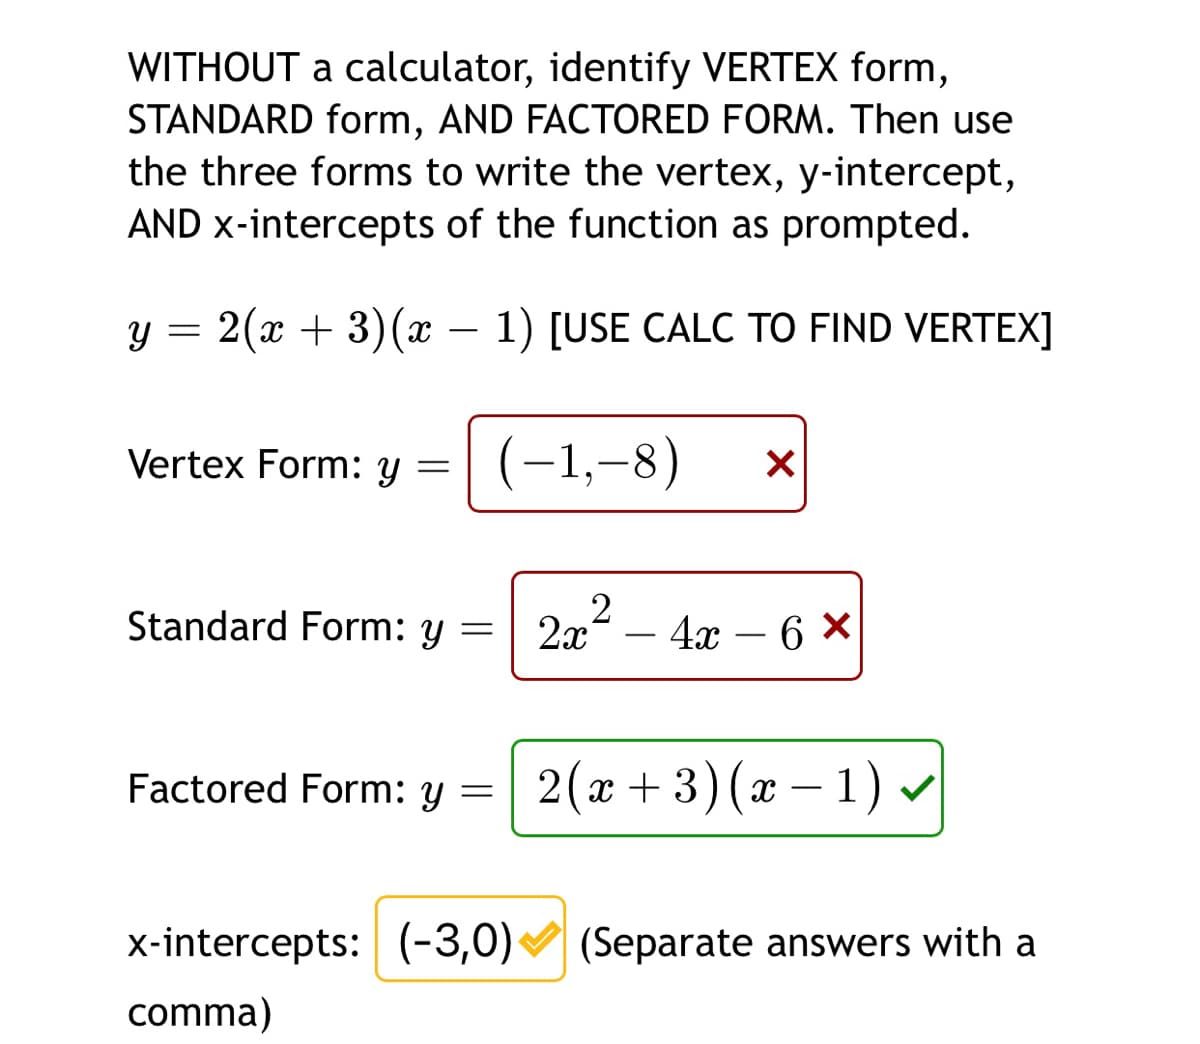 WITHOUT a calculator, identify VERTEX form,
STANDARD form, AND FACTORED FORM. Then use
the three forms to write the vertex, y-intercept,
AND x-intercepts of the function as prompted.
y = 2(x + 3)(x – 1) [USE CALC TO FIND VERTEX]
-
Vertex Form: y
(-1,-8)
Standard Form: y = 2x – 4x – 6 ×
- 4х — 6
Factored Form: y
2(x + 3)(x – 1) v
x-intercepts: (-3,0)
(Separate answers with a
comma)
